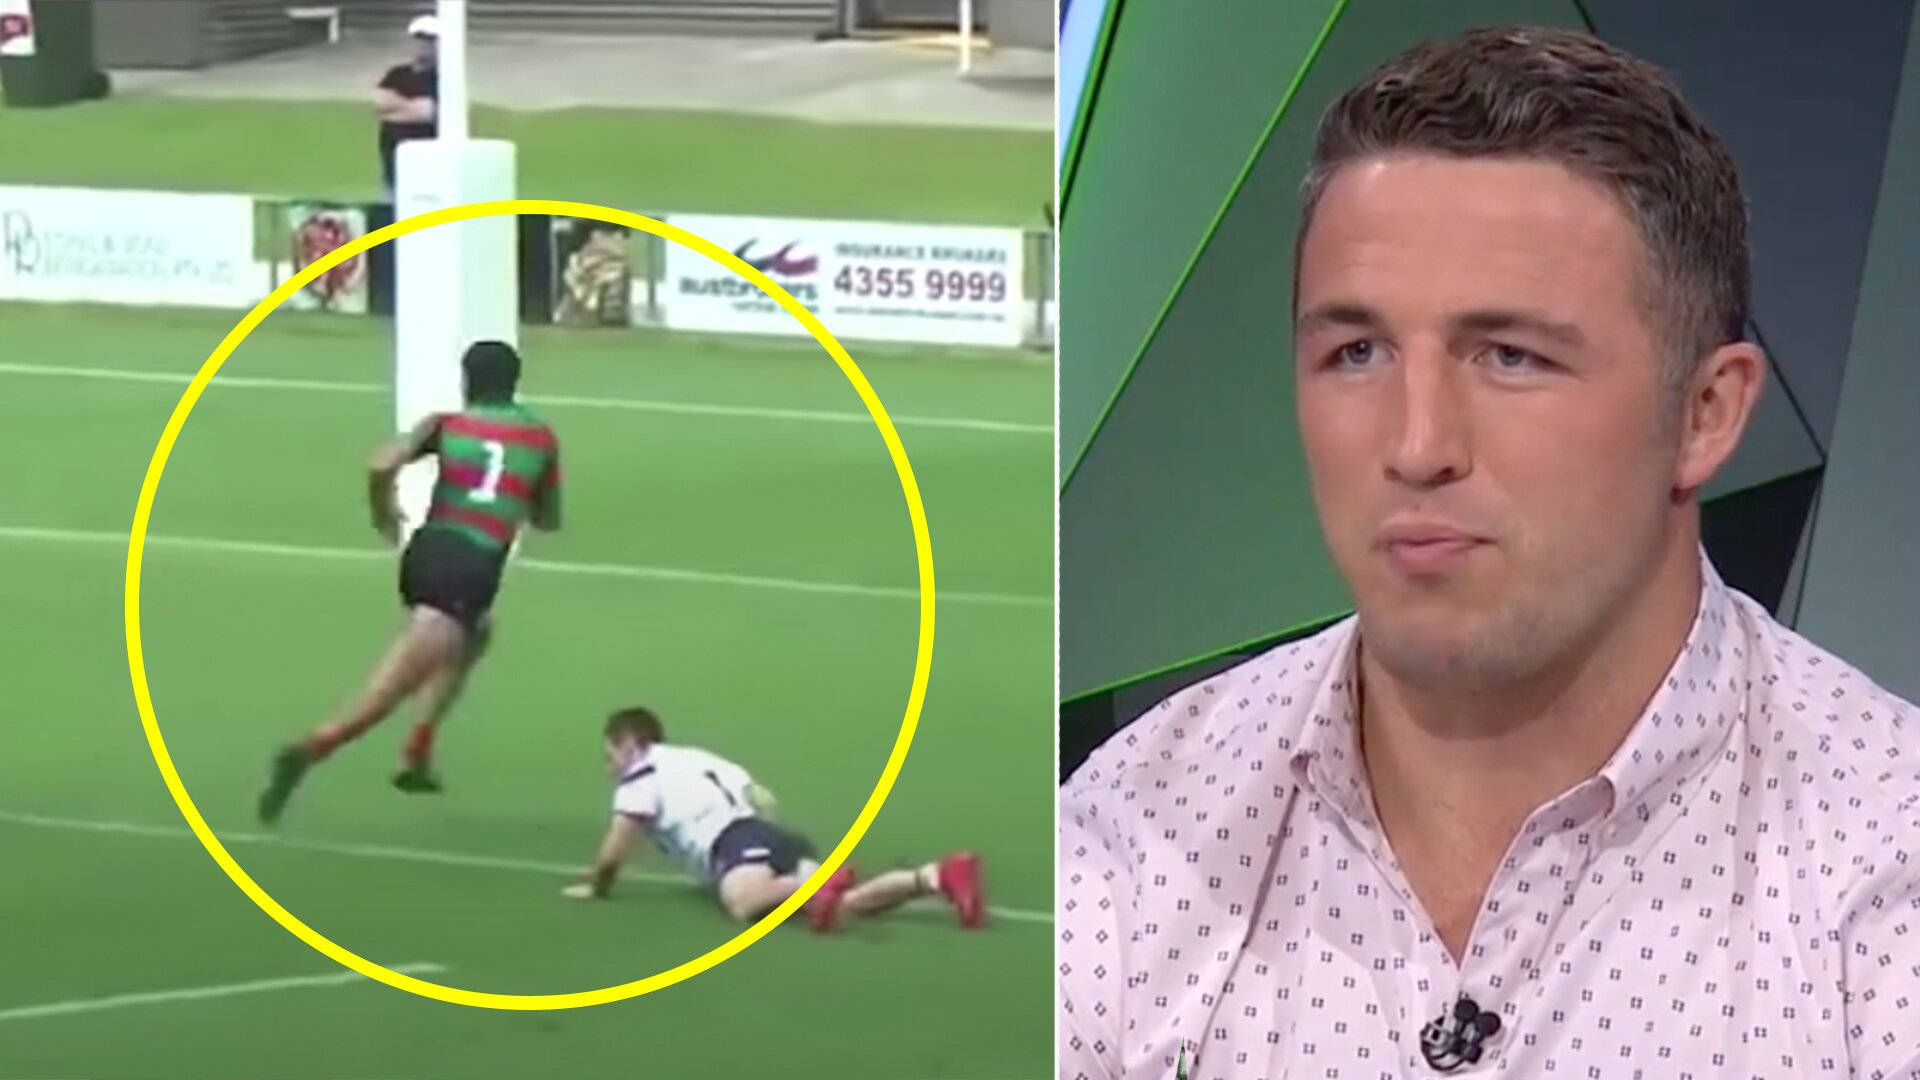 The 6'4 Australian teen sensation who left Union for the NRL has finally dropped a highlight reel